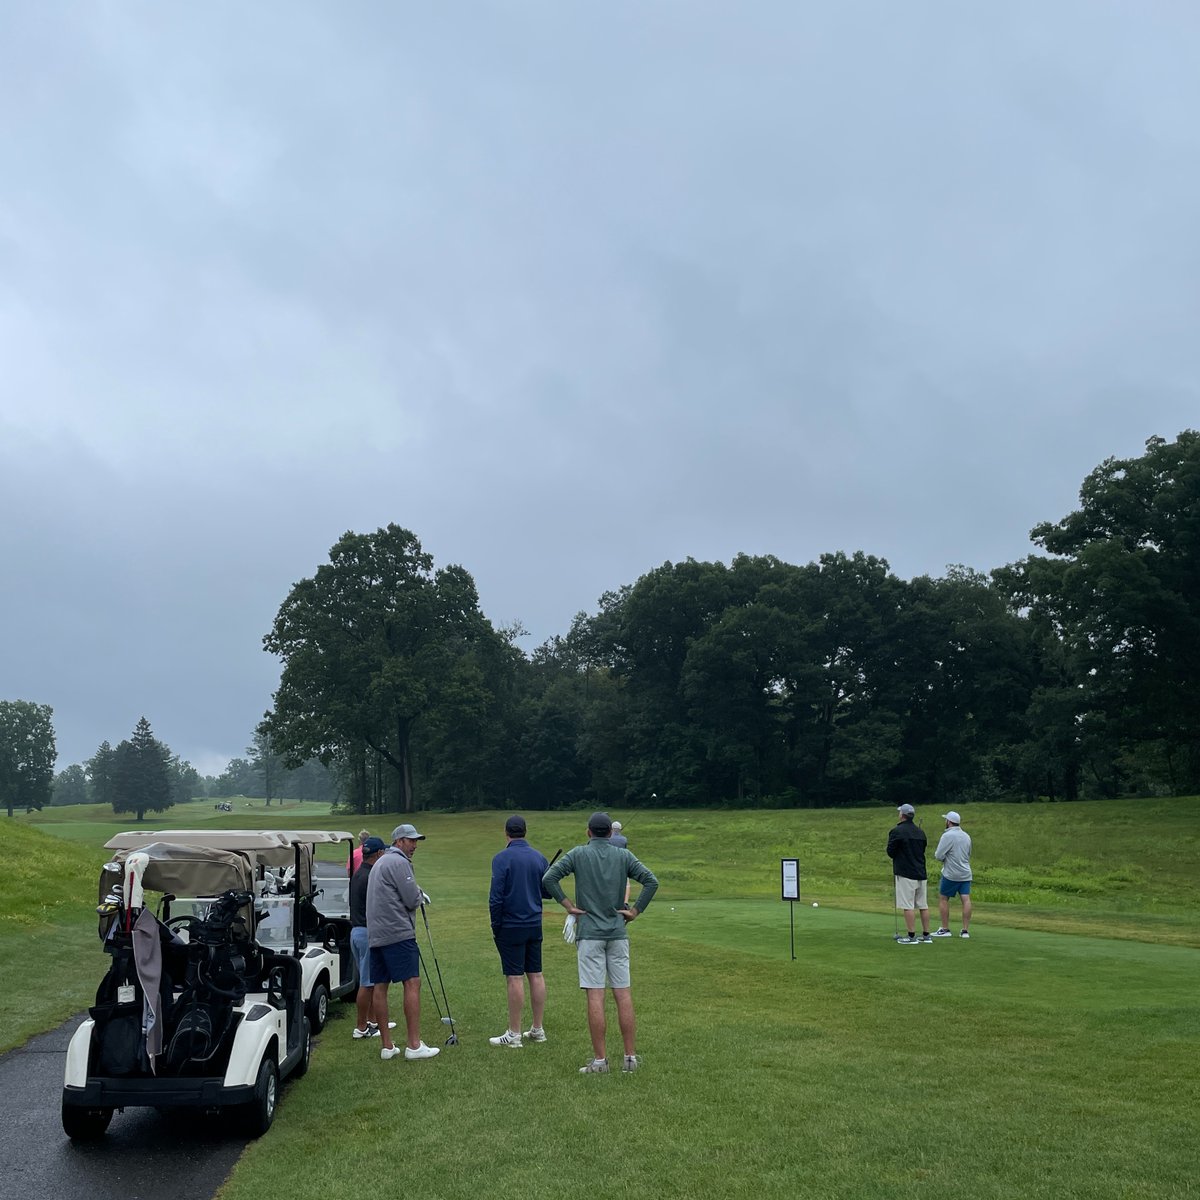 A little bit of rain couldn't stop our supporters from brightening the lives of our residents and patients at the Masonicare Golf Classic! Thank you to all of our sponsors, golfers and volunteers. #ItsAllRightHere

Be sure to stay tuned for more photos and results coming soon! ⛳